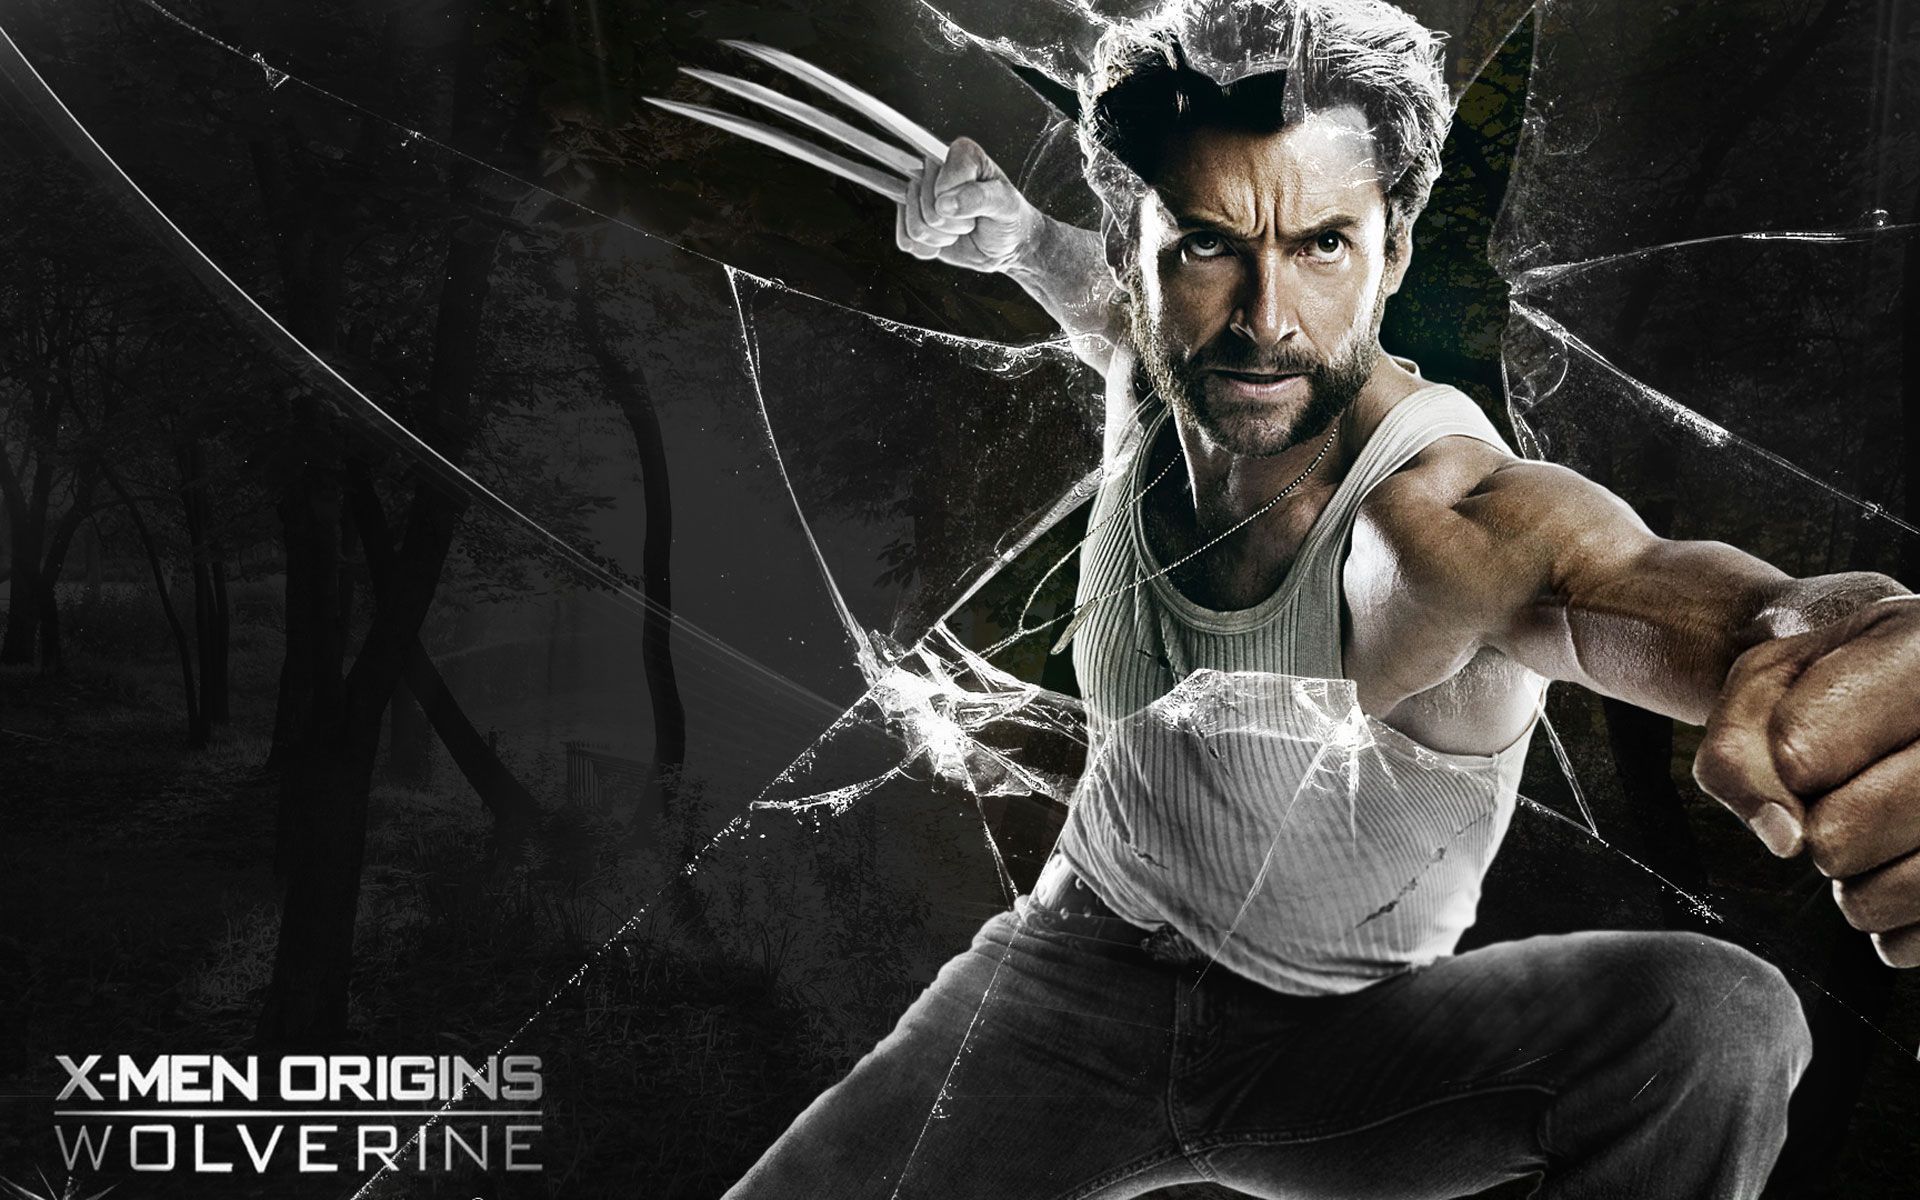 Wolverine desktop wallpapers in HD - spin off from X-Men movie